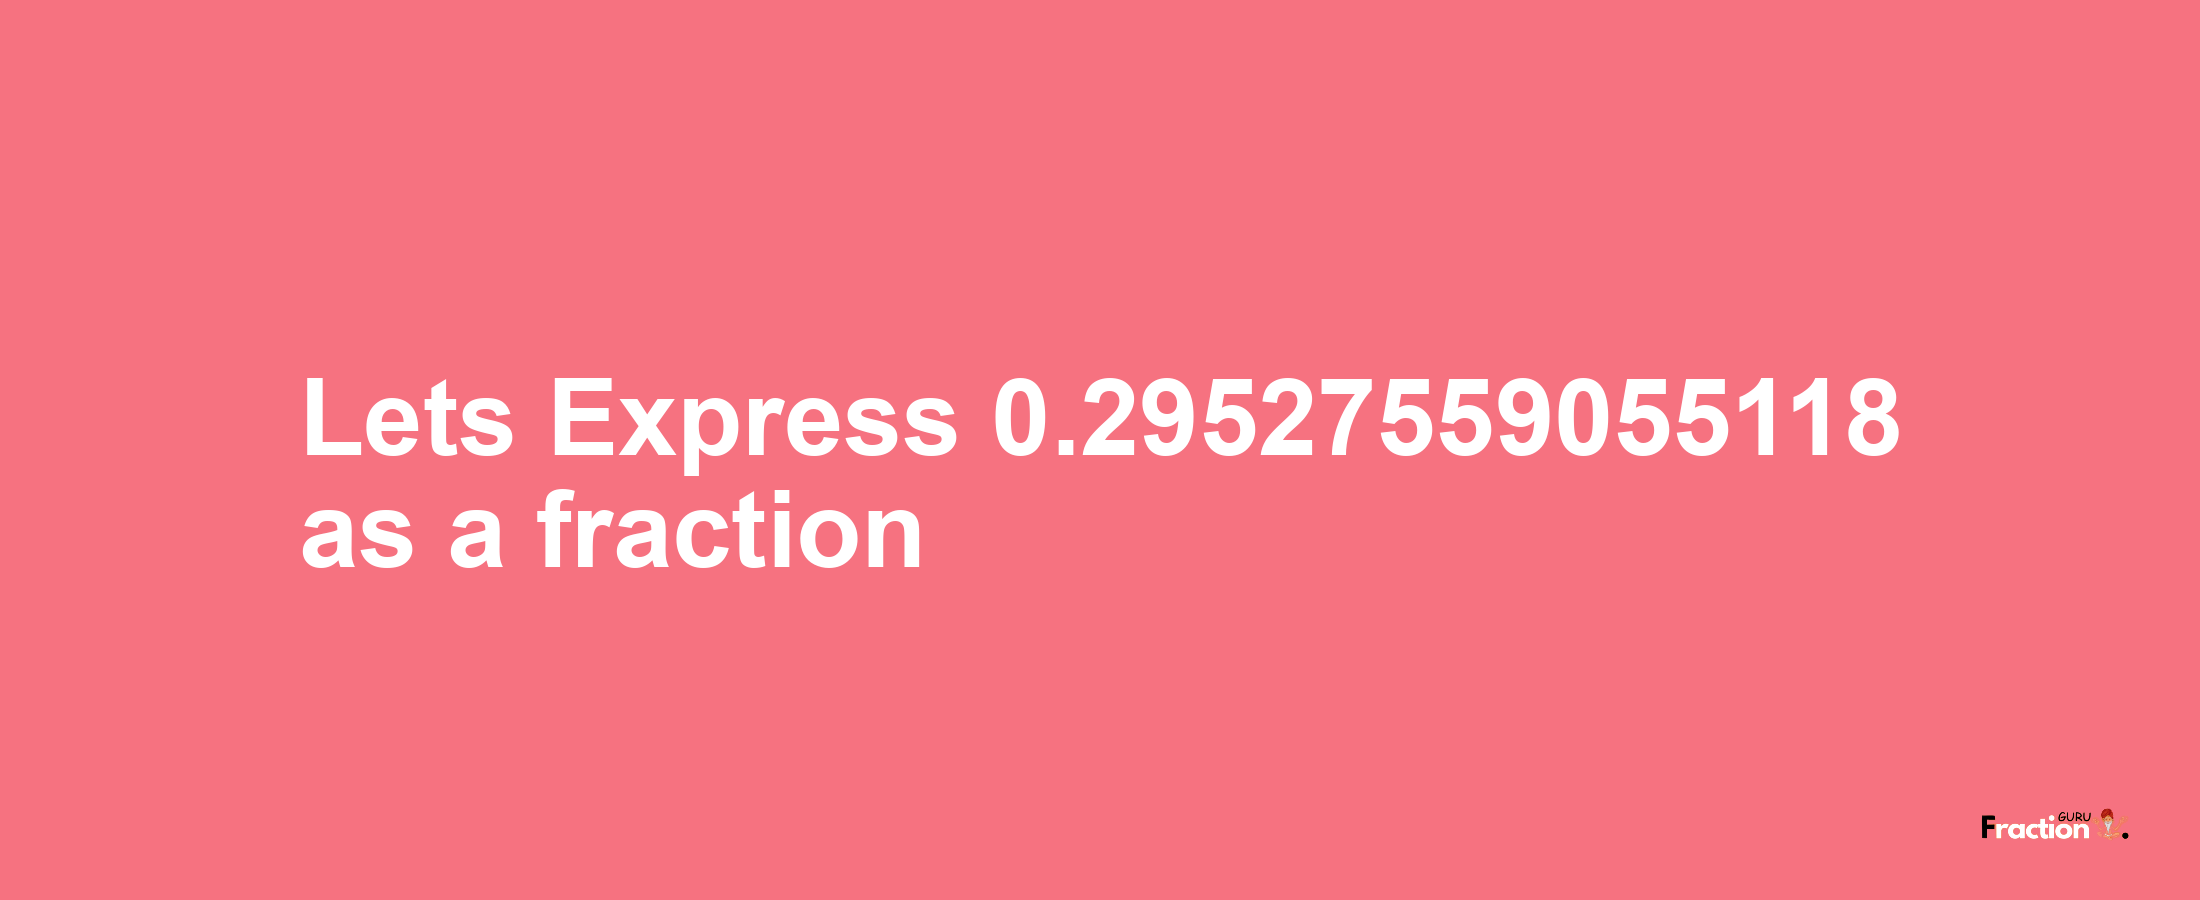 Lets Express 0.29527559055118 as afraction